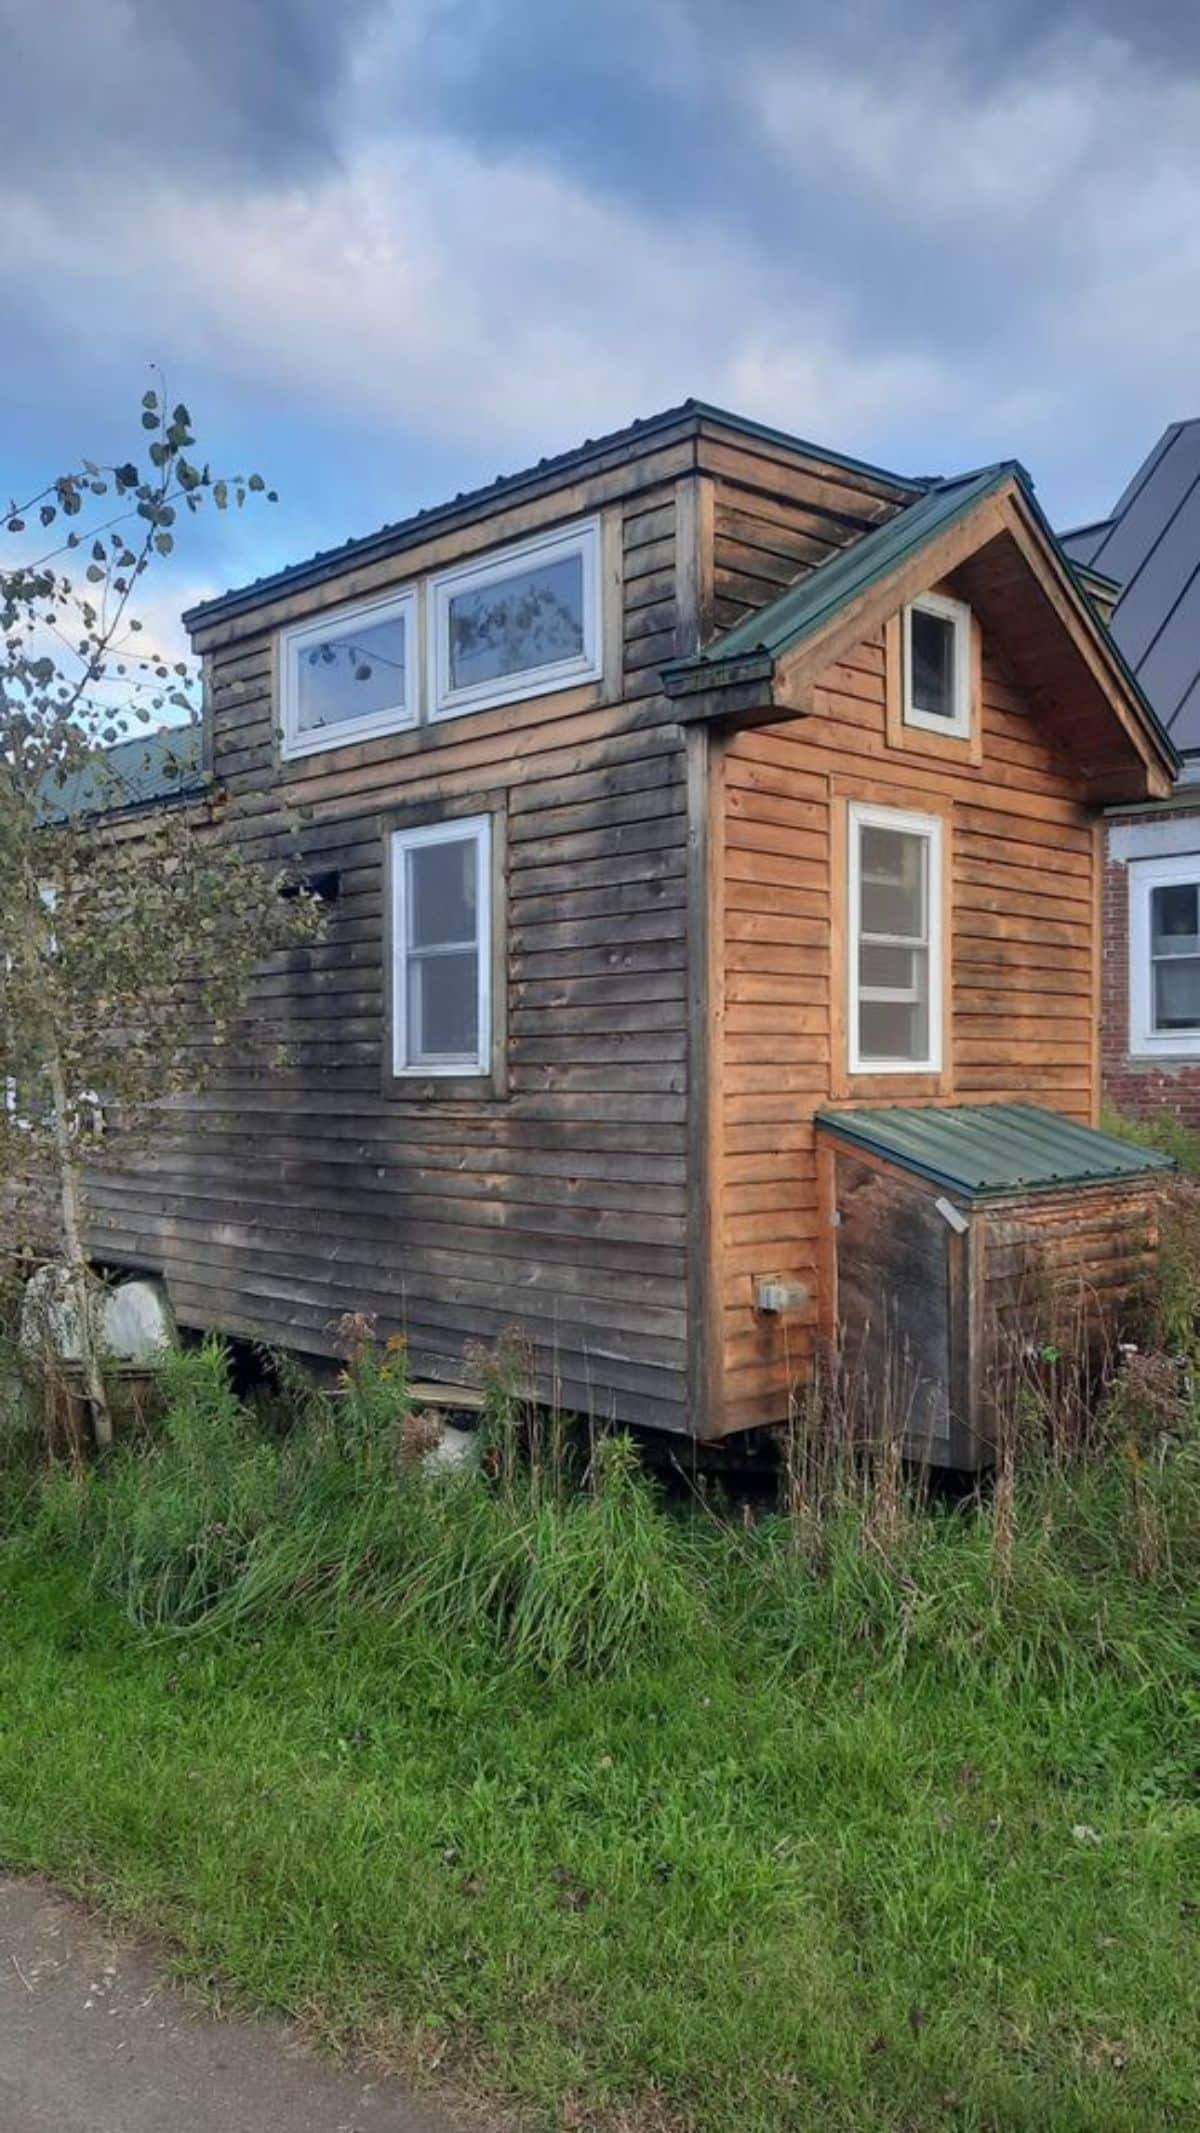 Wooden exterior of 24' Tiny House